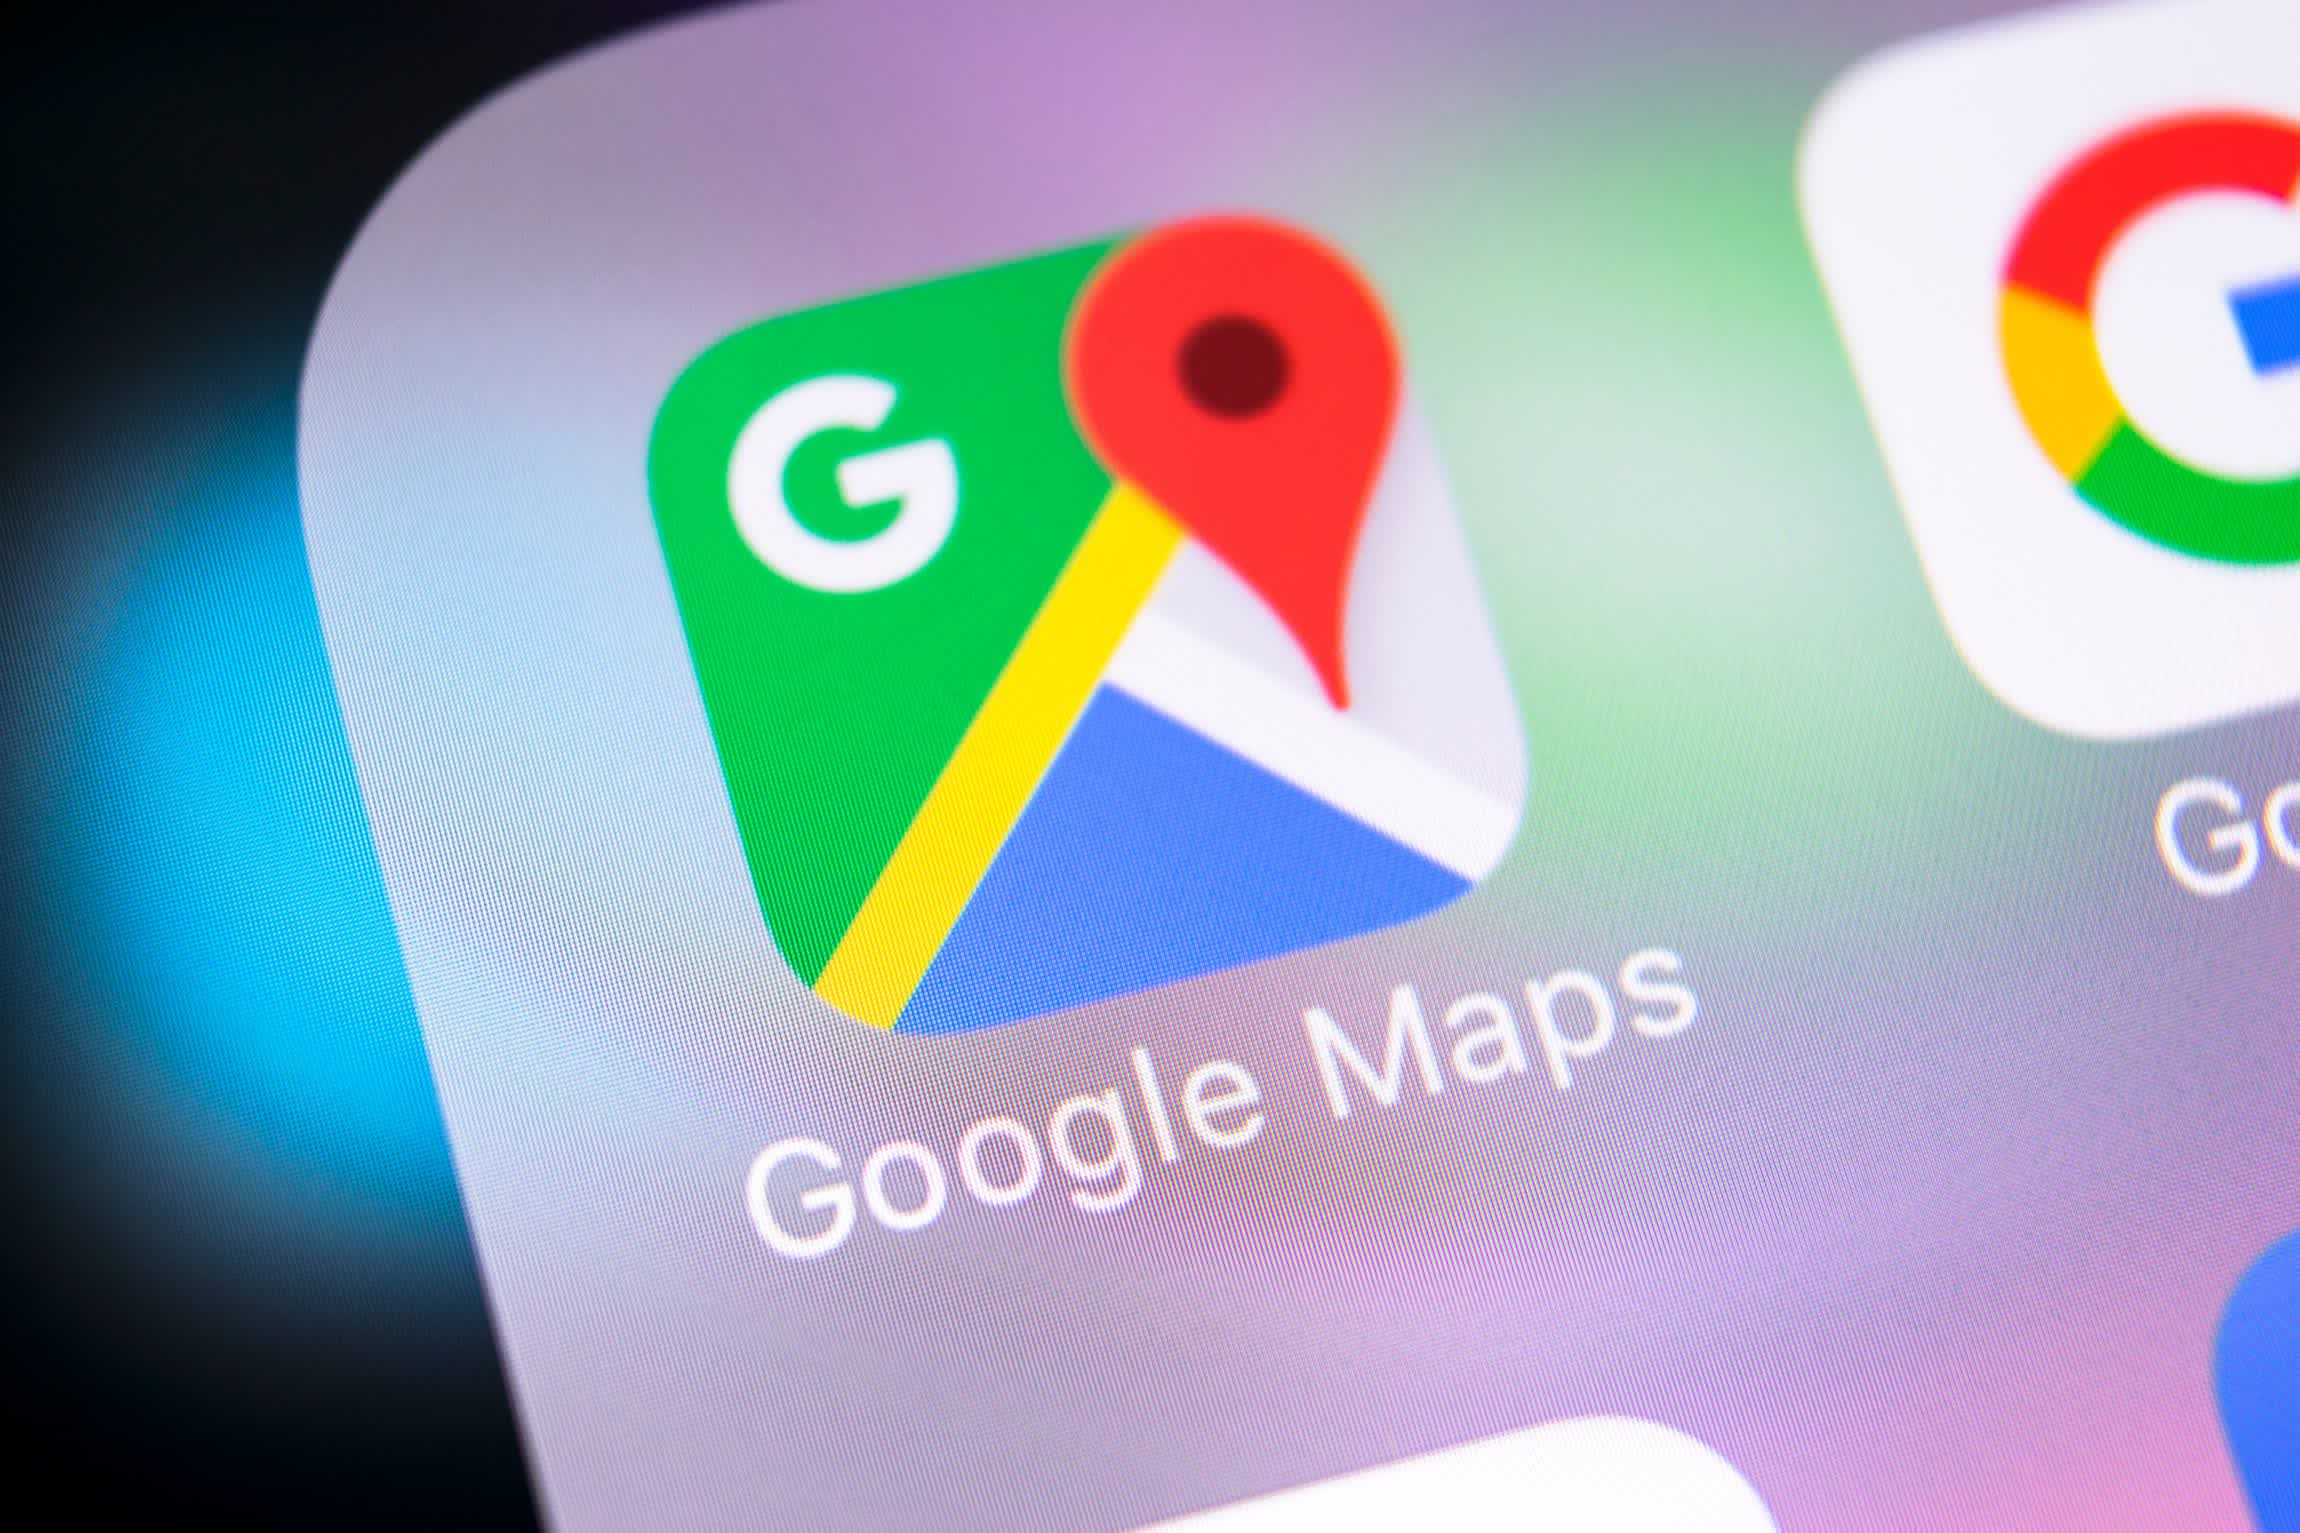 US Justice Department is investigating two antitrust issues concerning Google Maps